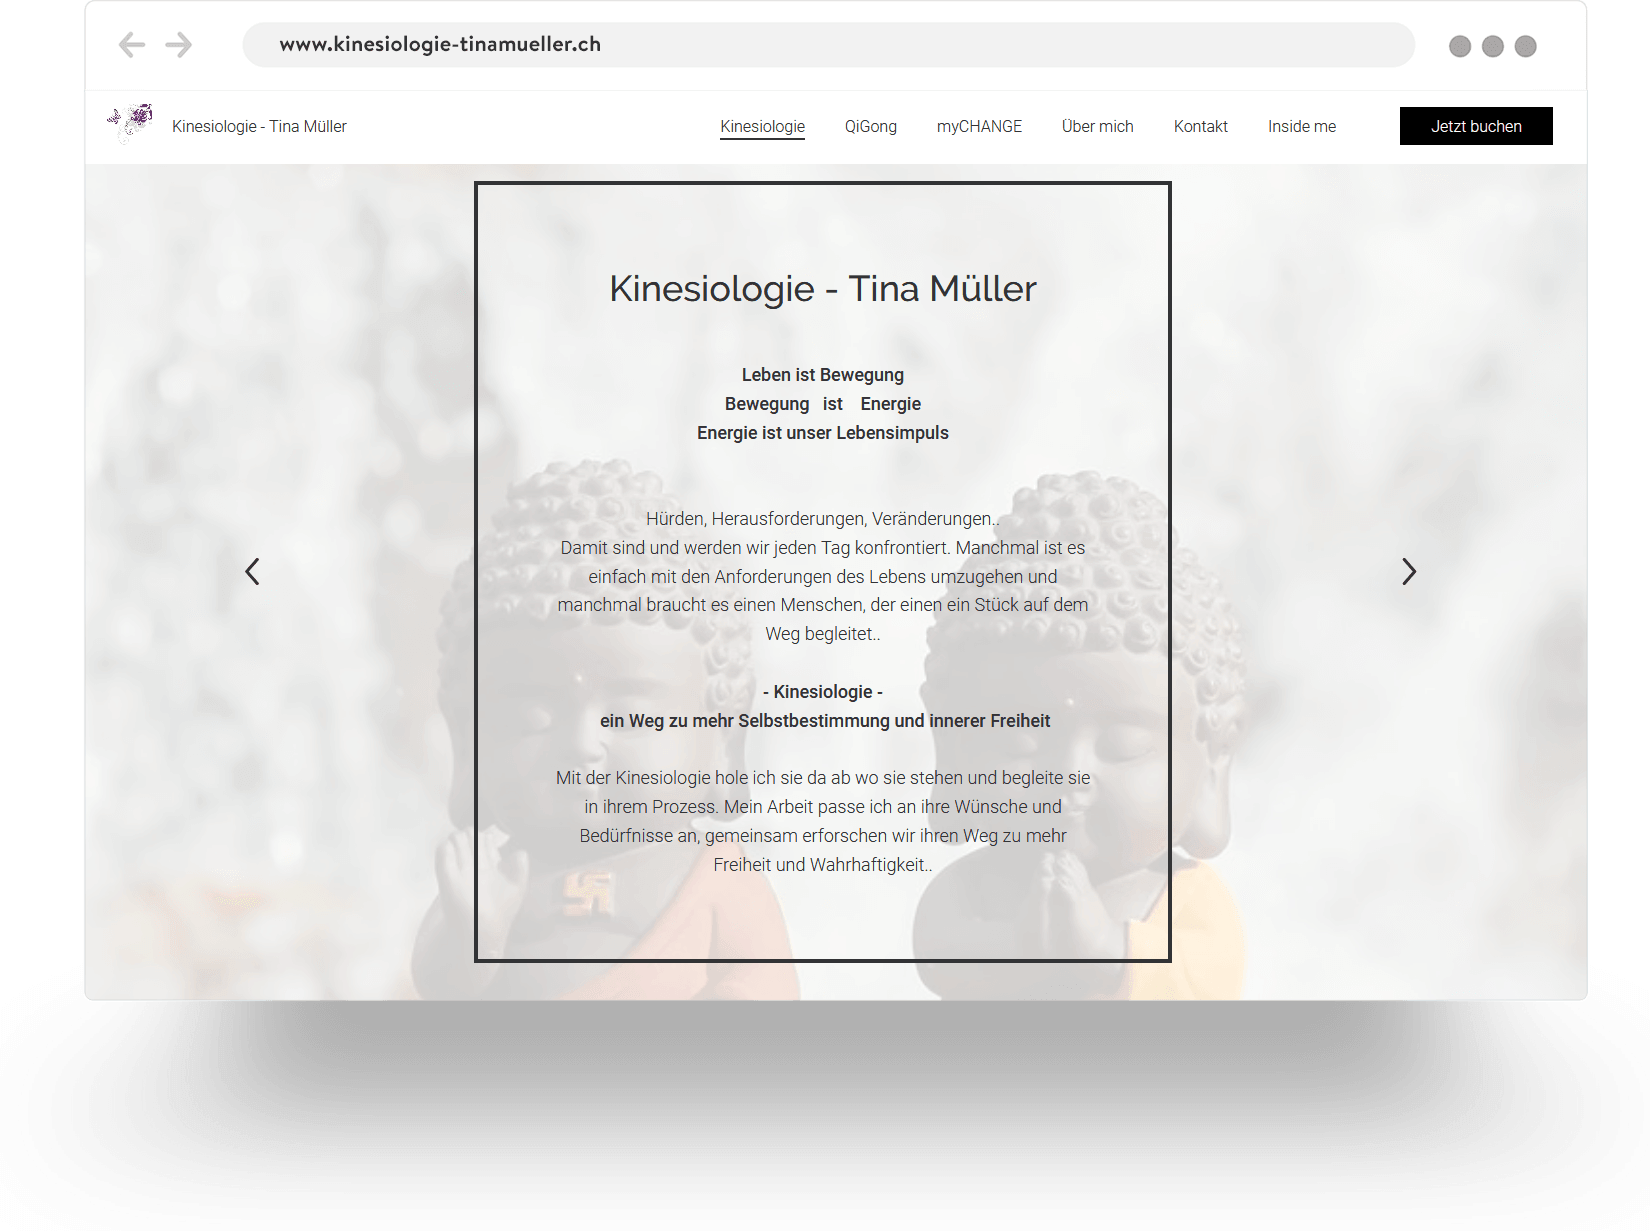 Example of a kinesiology website homepage built with Jimdo